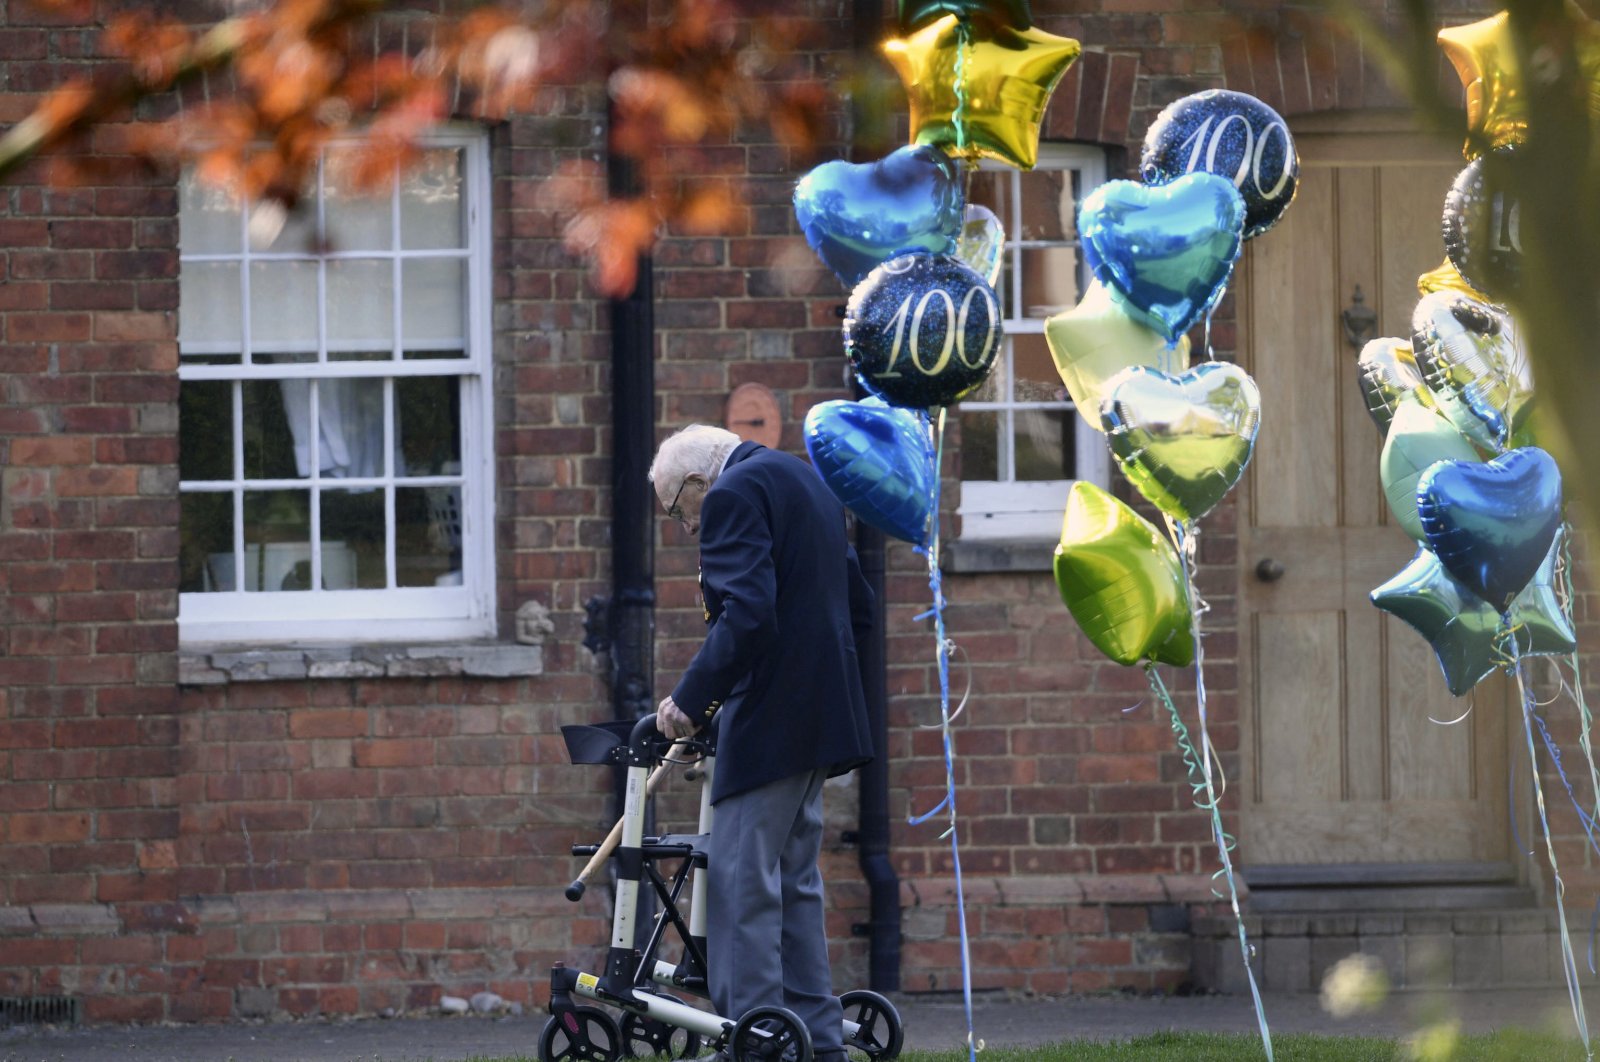 99-year old British military veteran Tom Moore, who has completed the 100th length of his garden at his home in Marston Moretaine, raising millions of pounds for the NHS with donations to his fundraising challenge from around the world, Thursday April 16, 2020. (AP Photo)